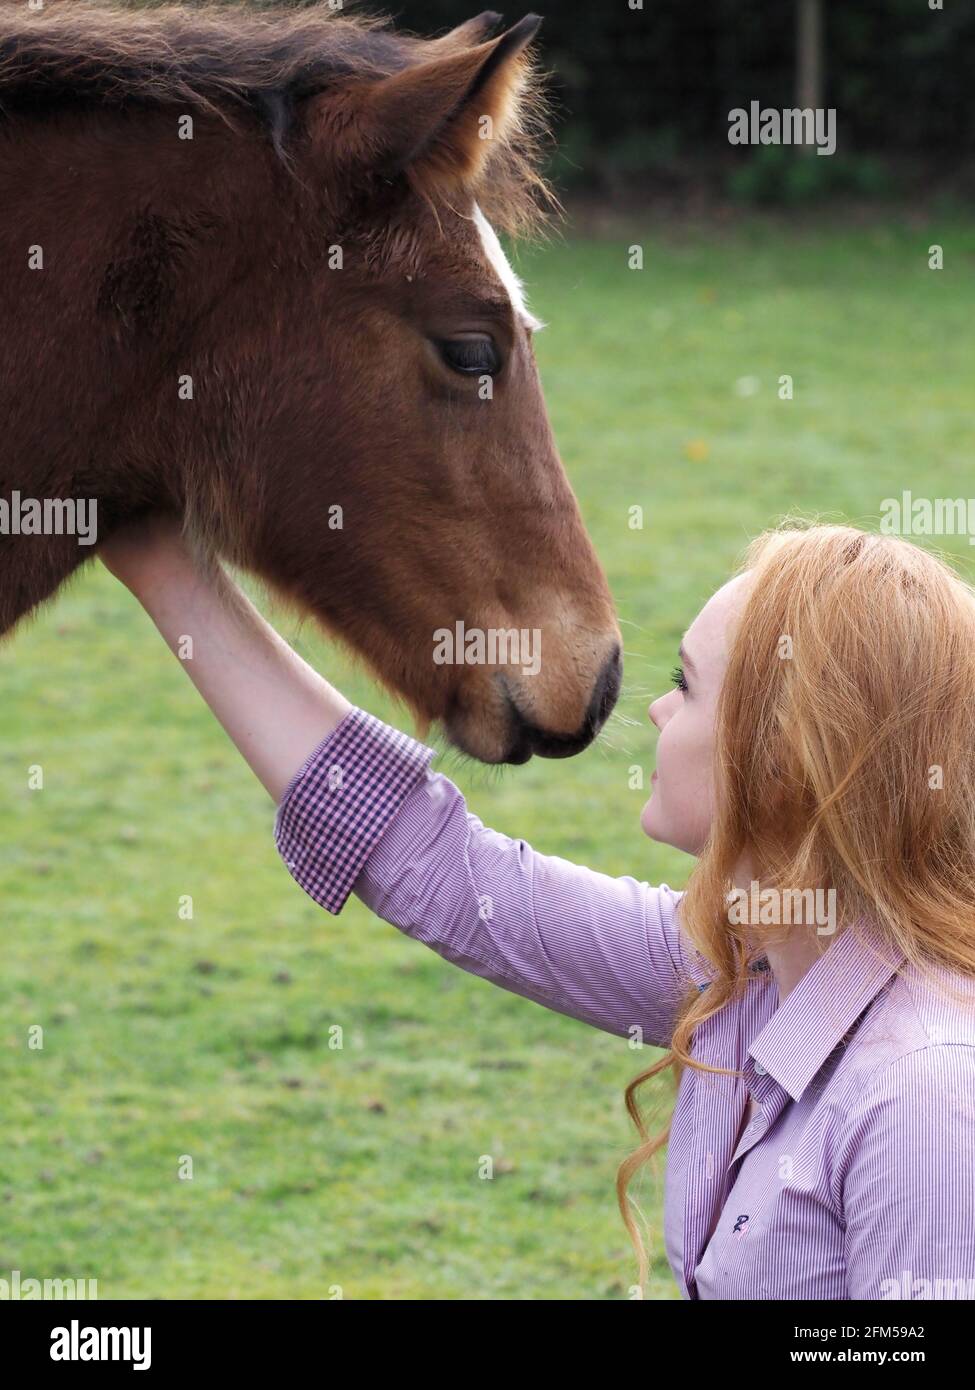 A young woman with red hair interacts with a young bay foal. Stock Photo